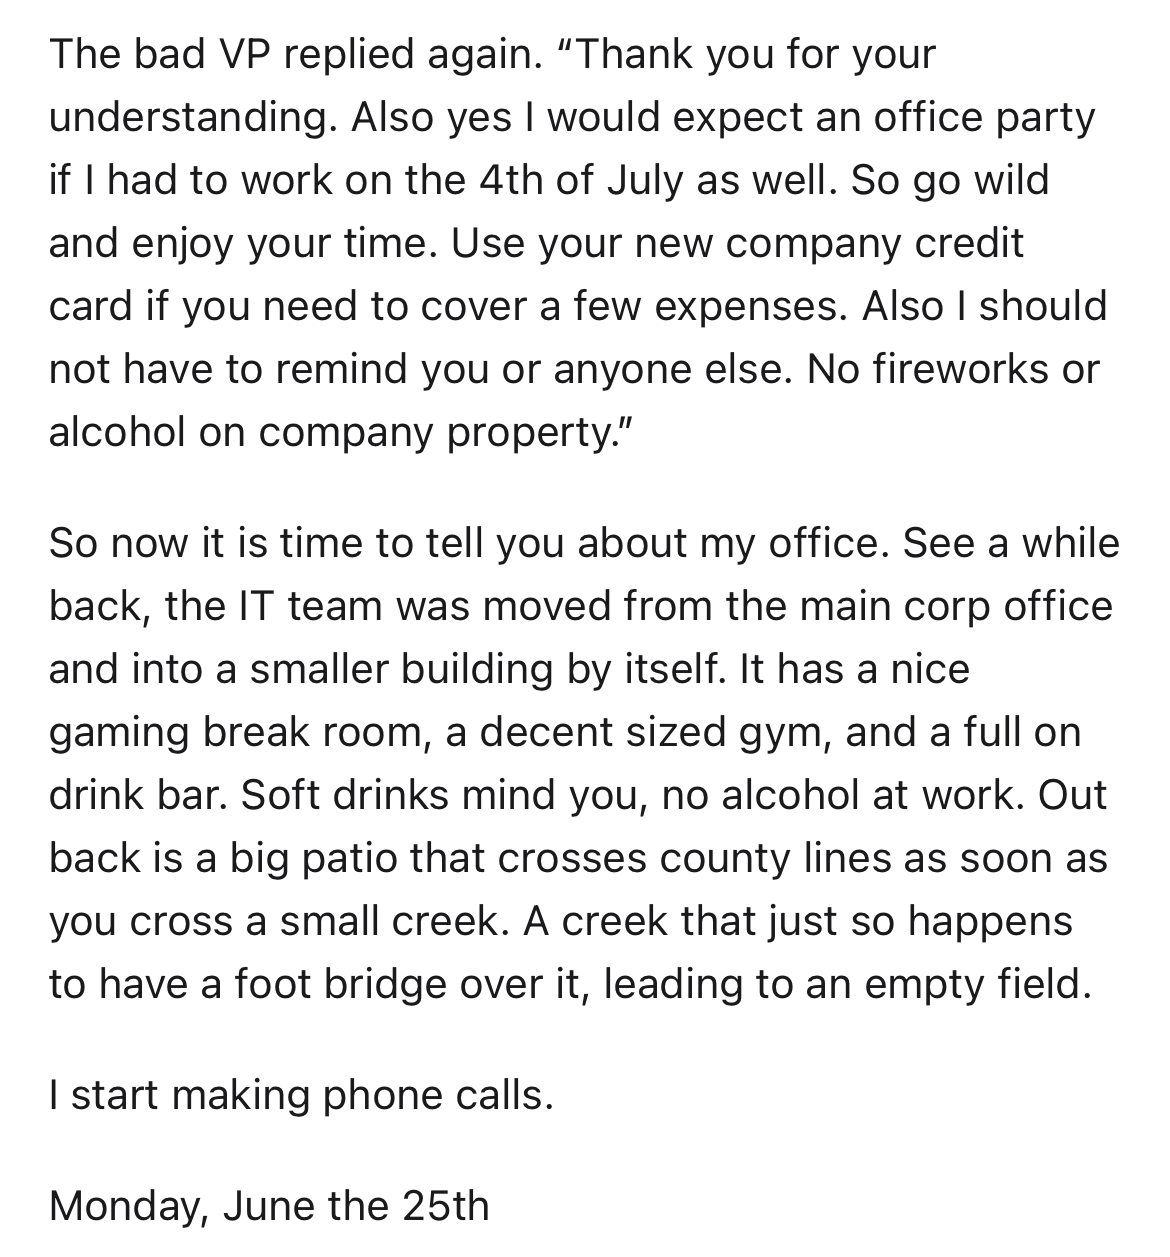 employees throw $6k 4th of July party at work -just - The bad Vp replied again. "Thank you for your understanding. Also yes I would expect an office party if I had to work on the 4th of July as well. So go wild and enjoy your time. Use your new company cr